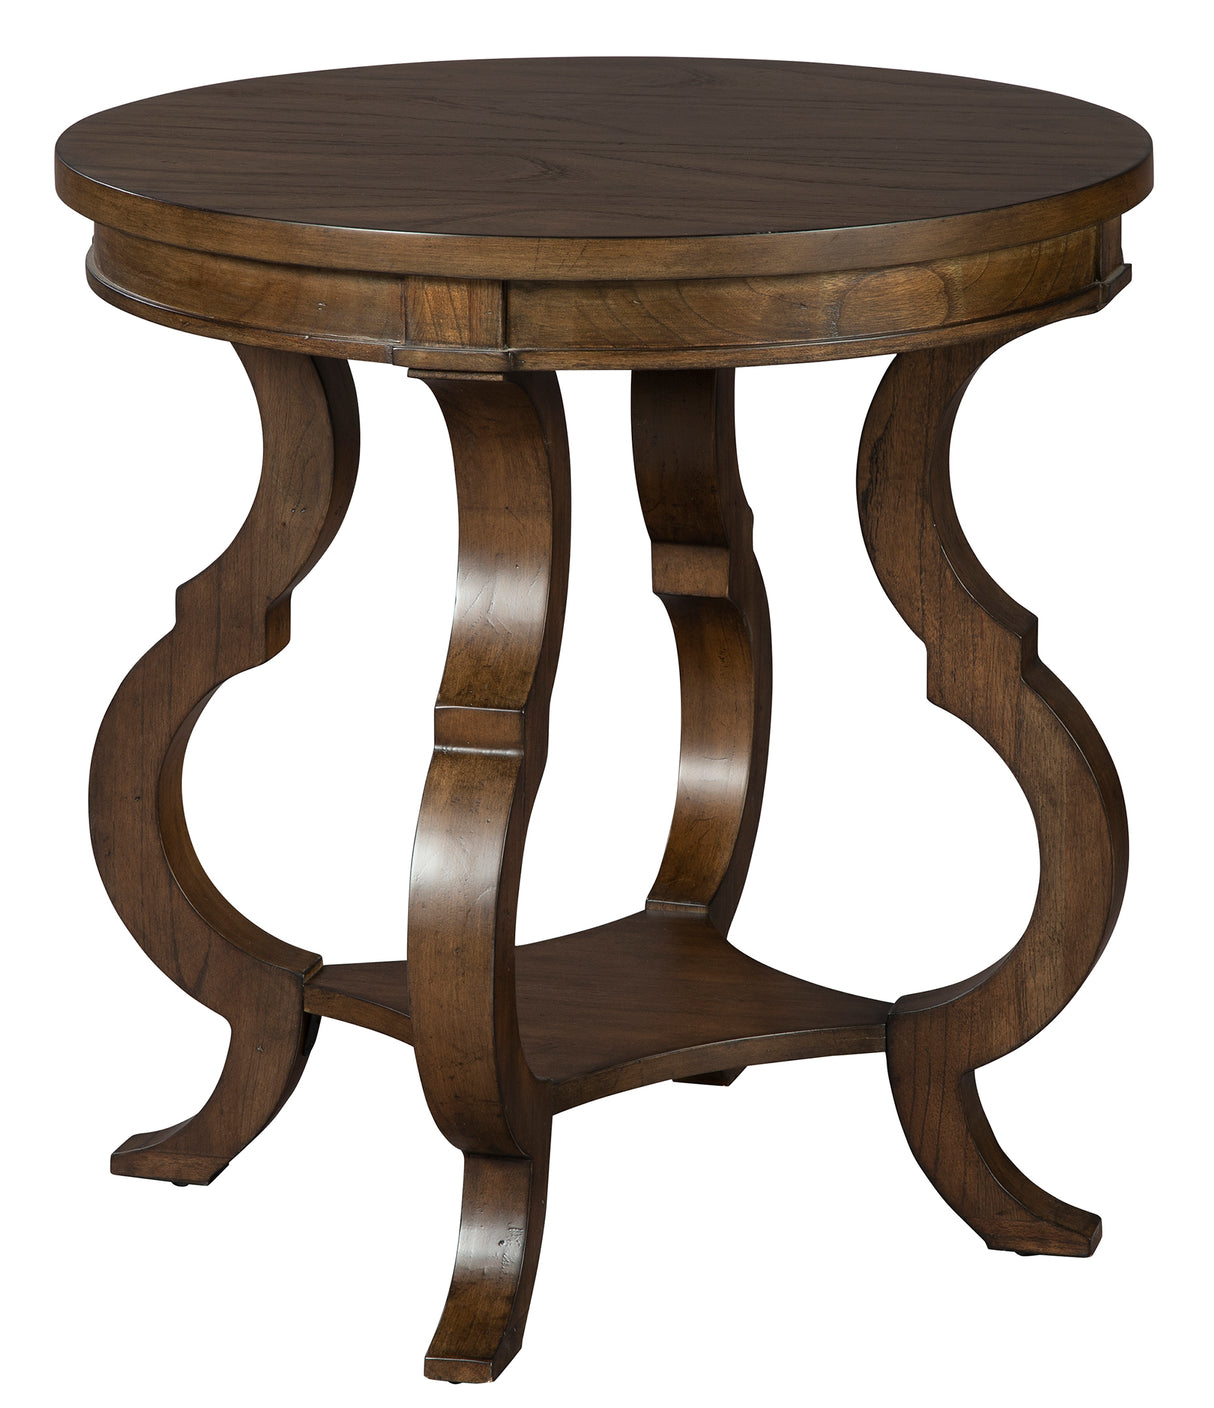 Hekman 24605 Accents 26in. x 26in. x 26.5in. End Table